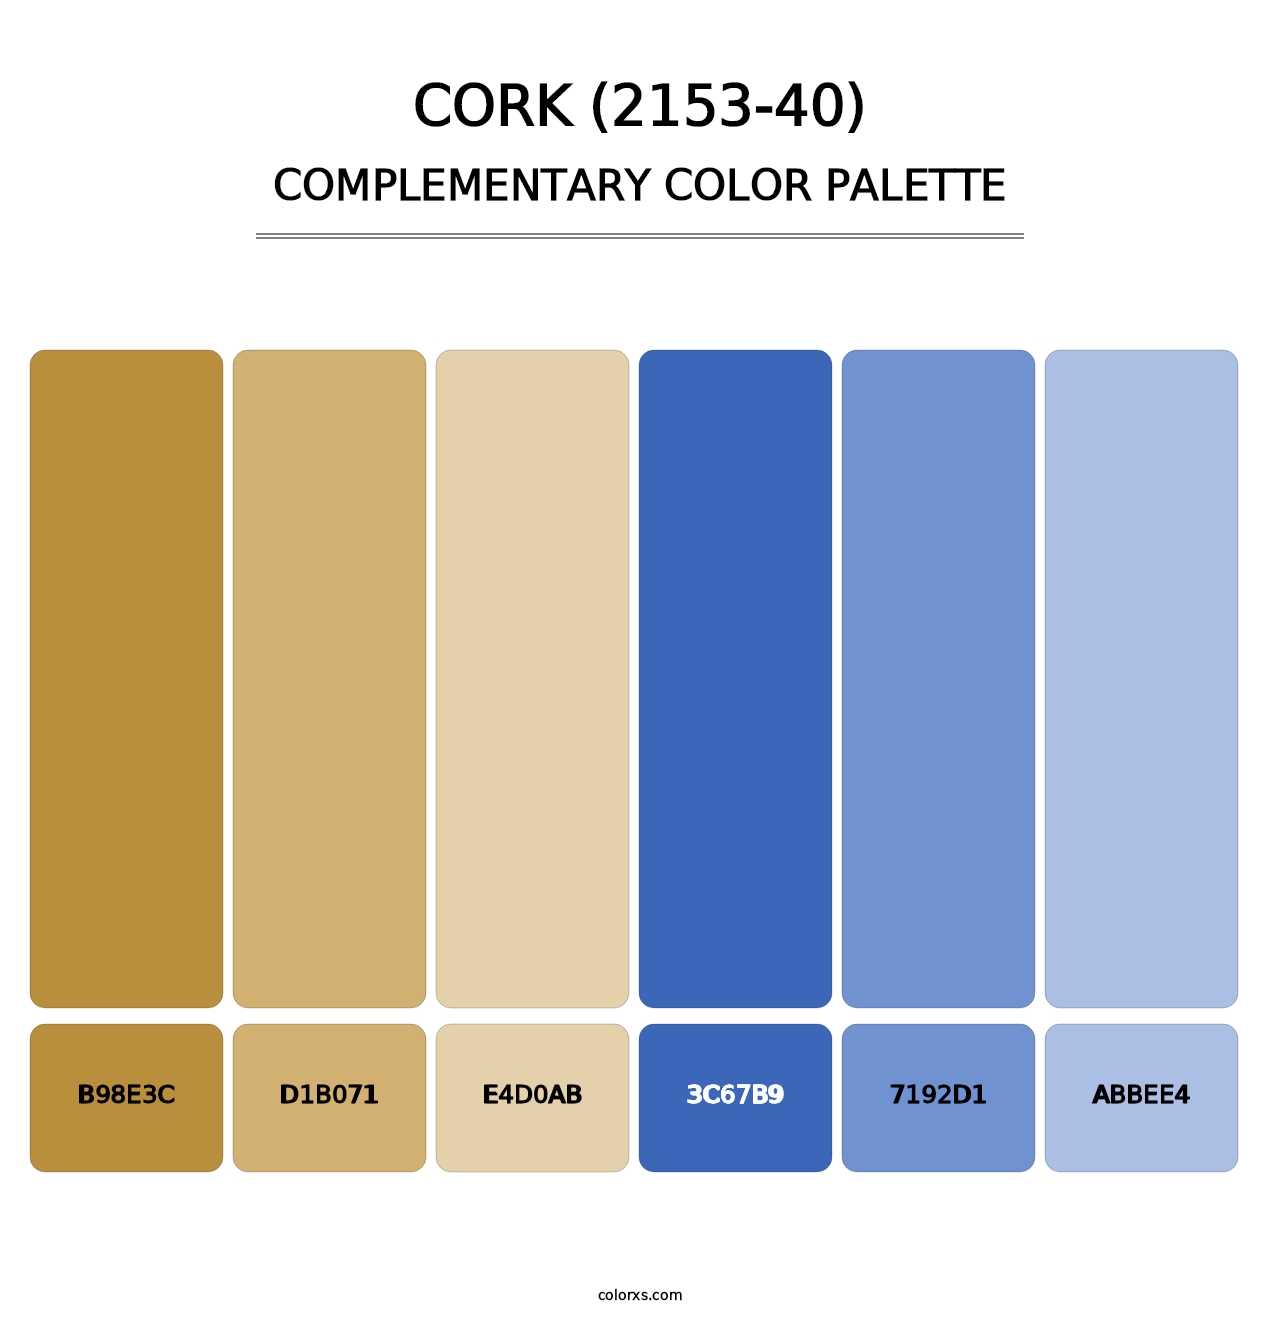 Cork (2153-40) - Complementary Color Palette